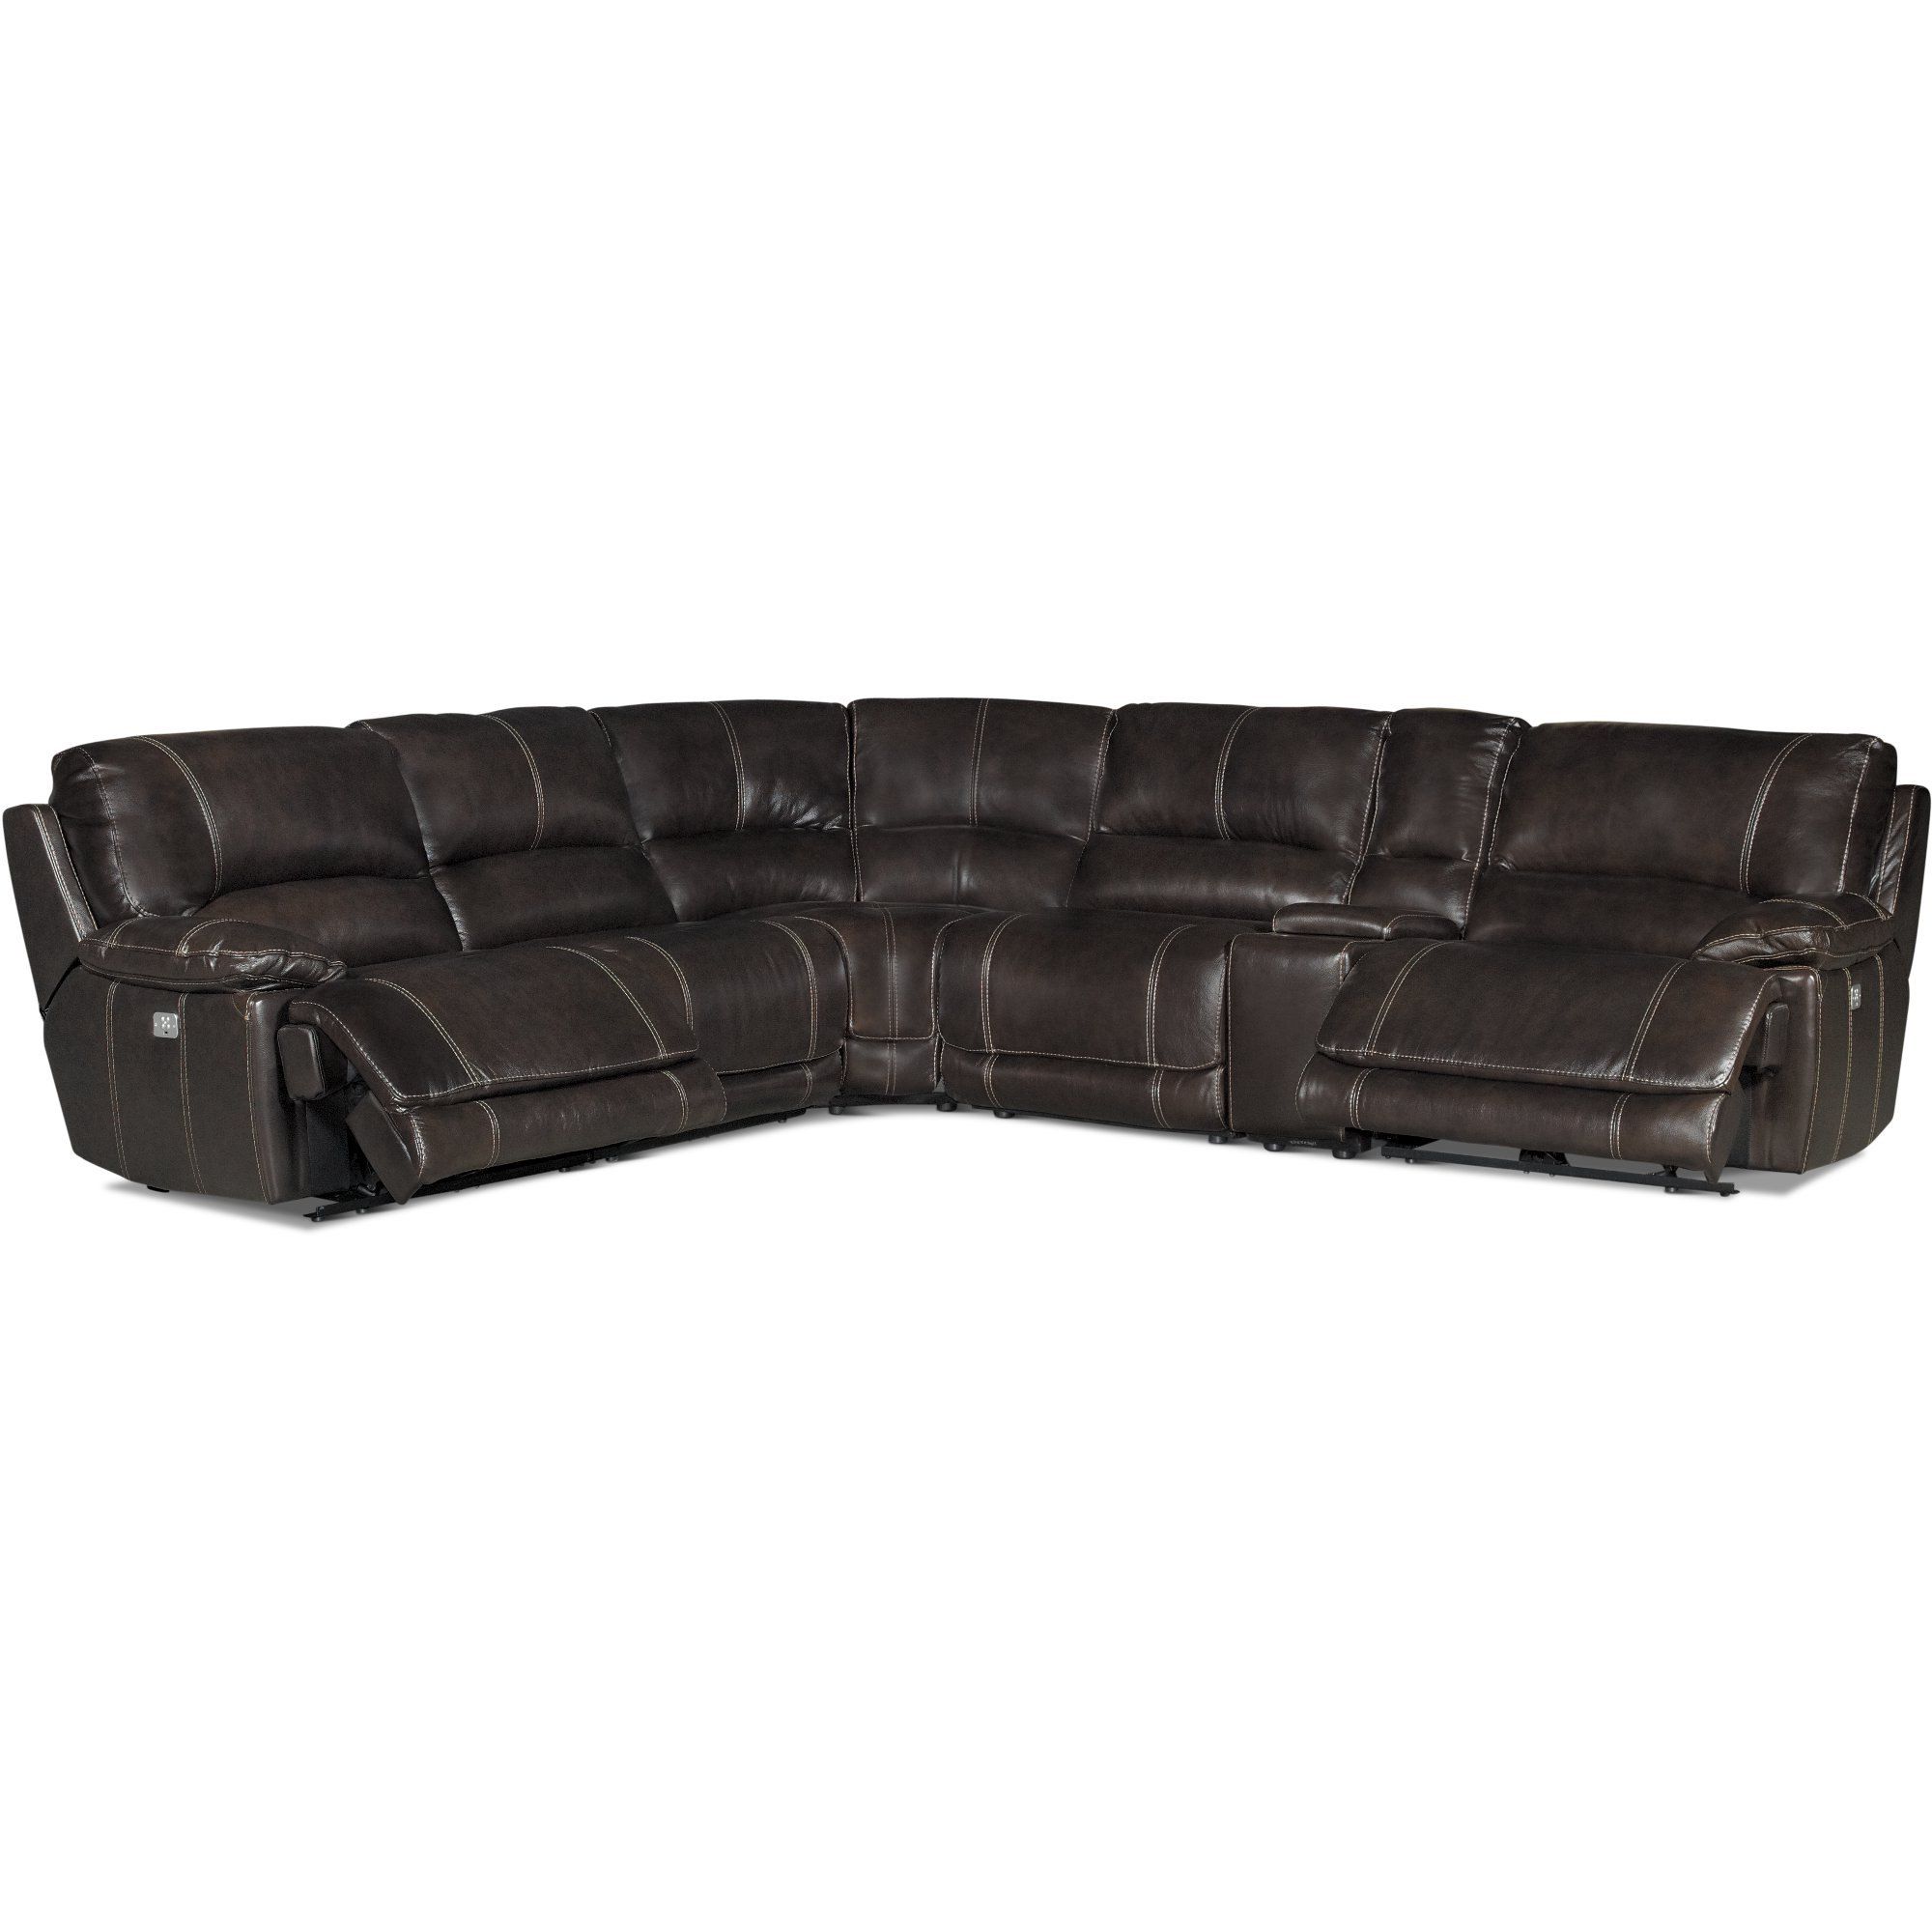 Calder Grey 6 Piece Manual Reclining Sectionals For Popular Winsome Recliner Cuddler Brown Piece Manual Reclining Sectional Sofa (Gallery 6 of 20)